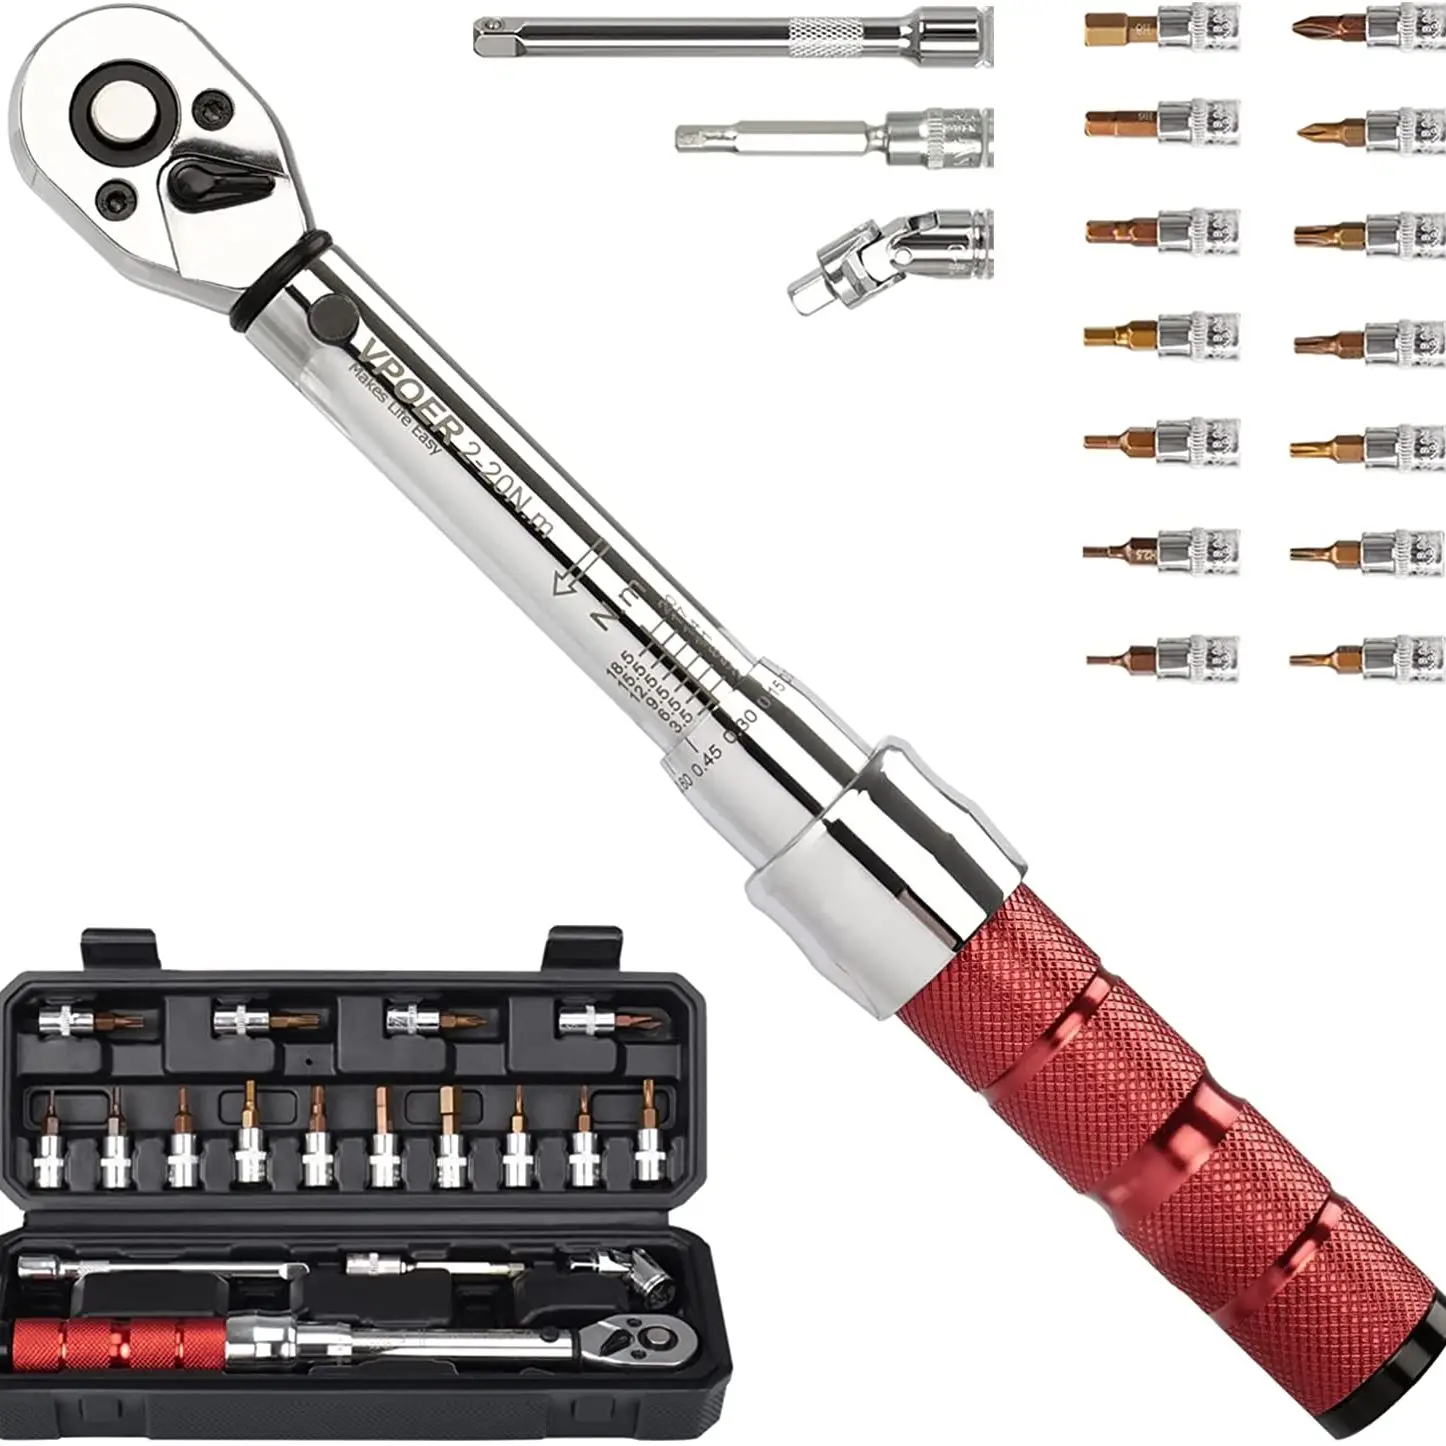 18PCS Bike Torque Wrench set 1/4-inch Drive 2-20 Nm (18-177 inch pounds) Bicycle Tool Kit for MTB Mountain Road Bikes